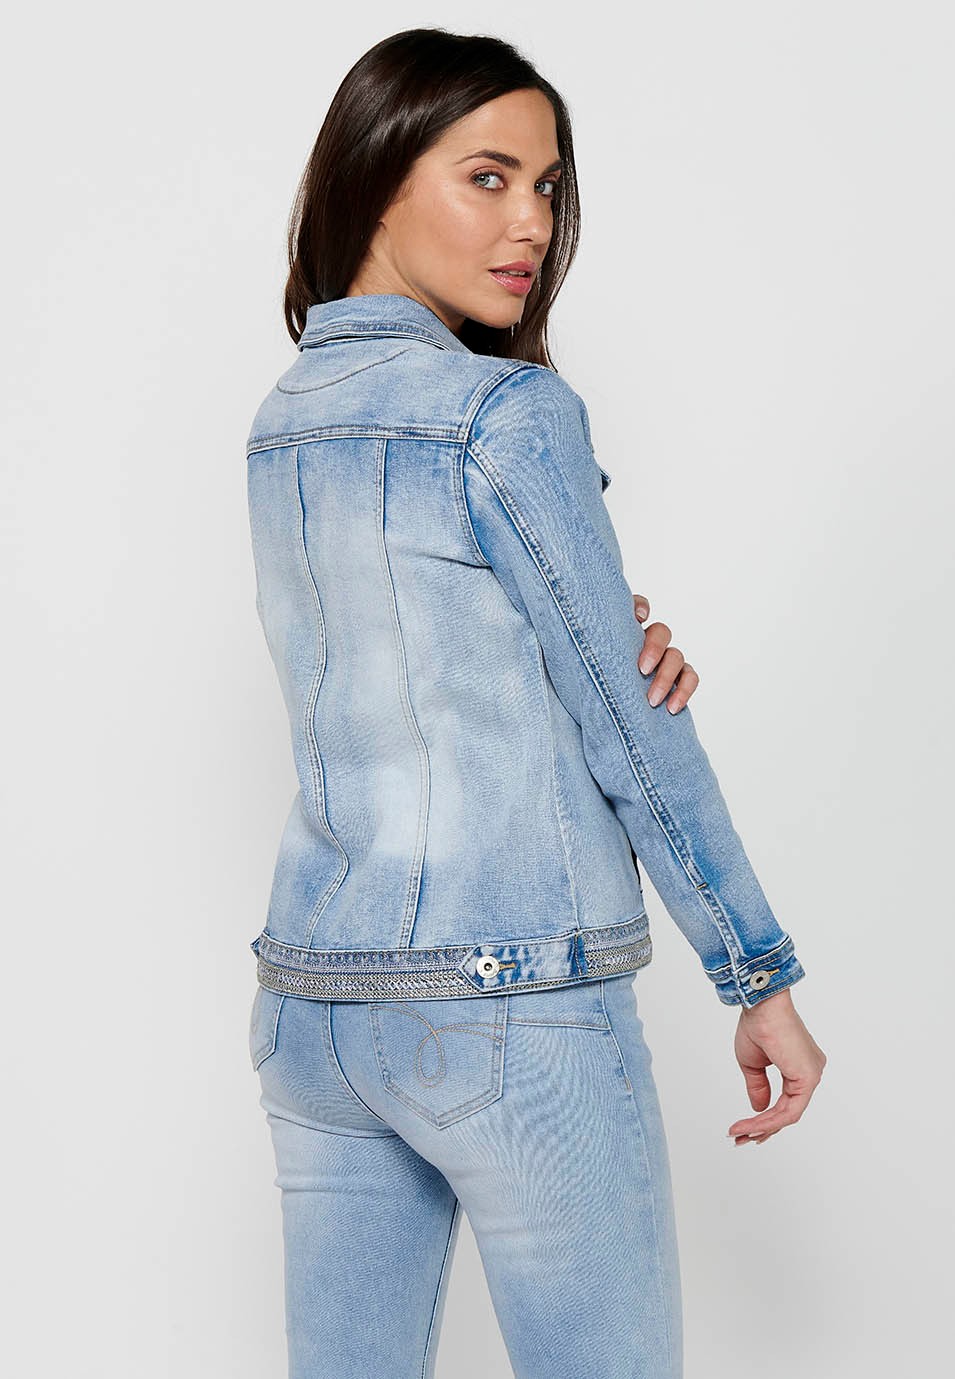 Denim jacket with front closure with buttons and shirt collar with pockets and embroidered details in light blue for women 6